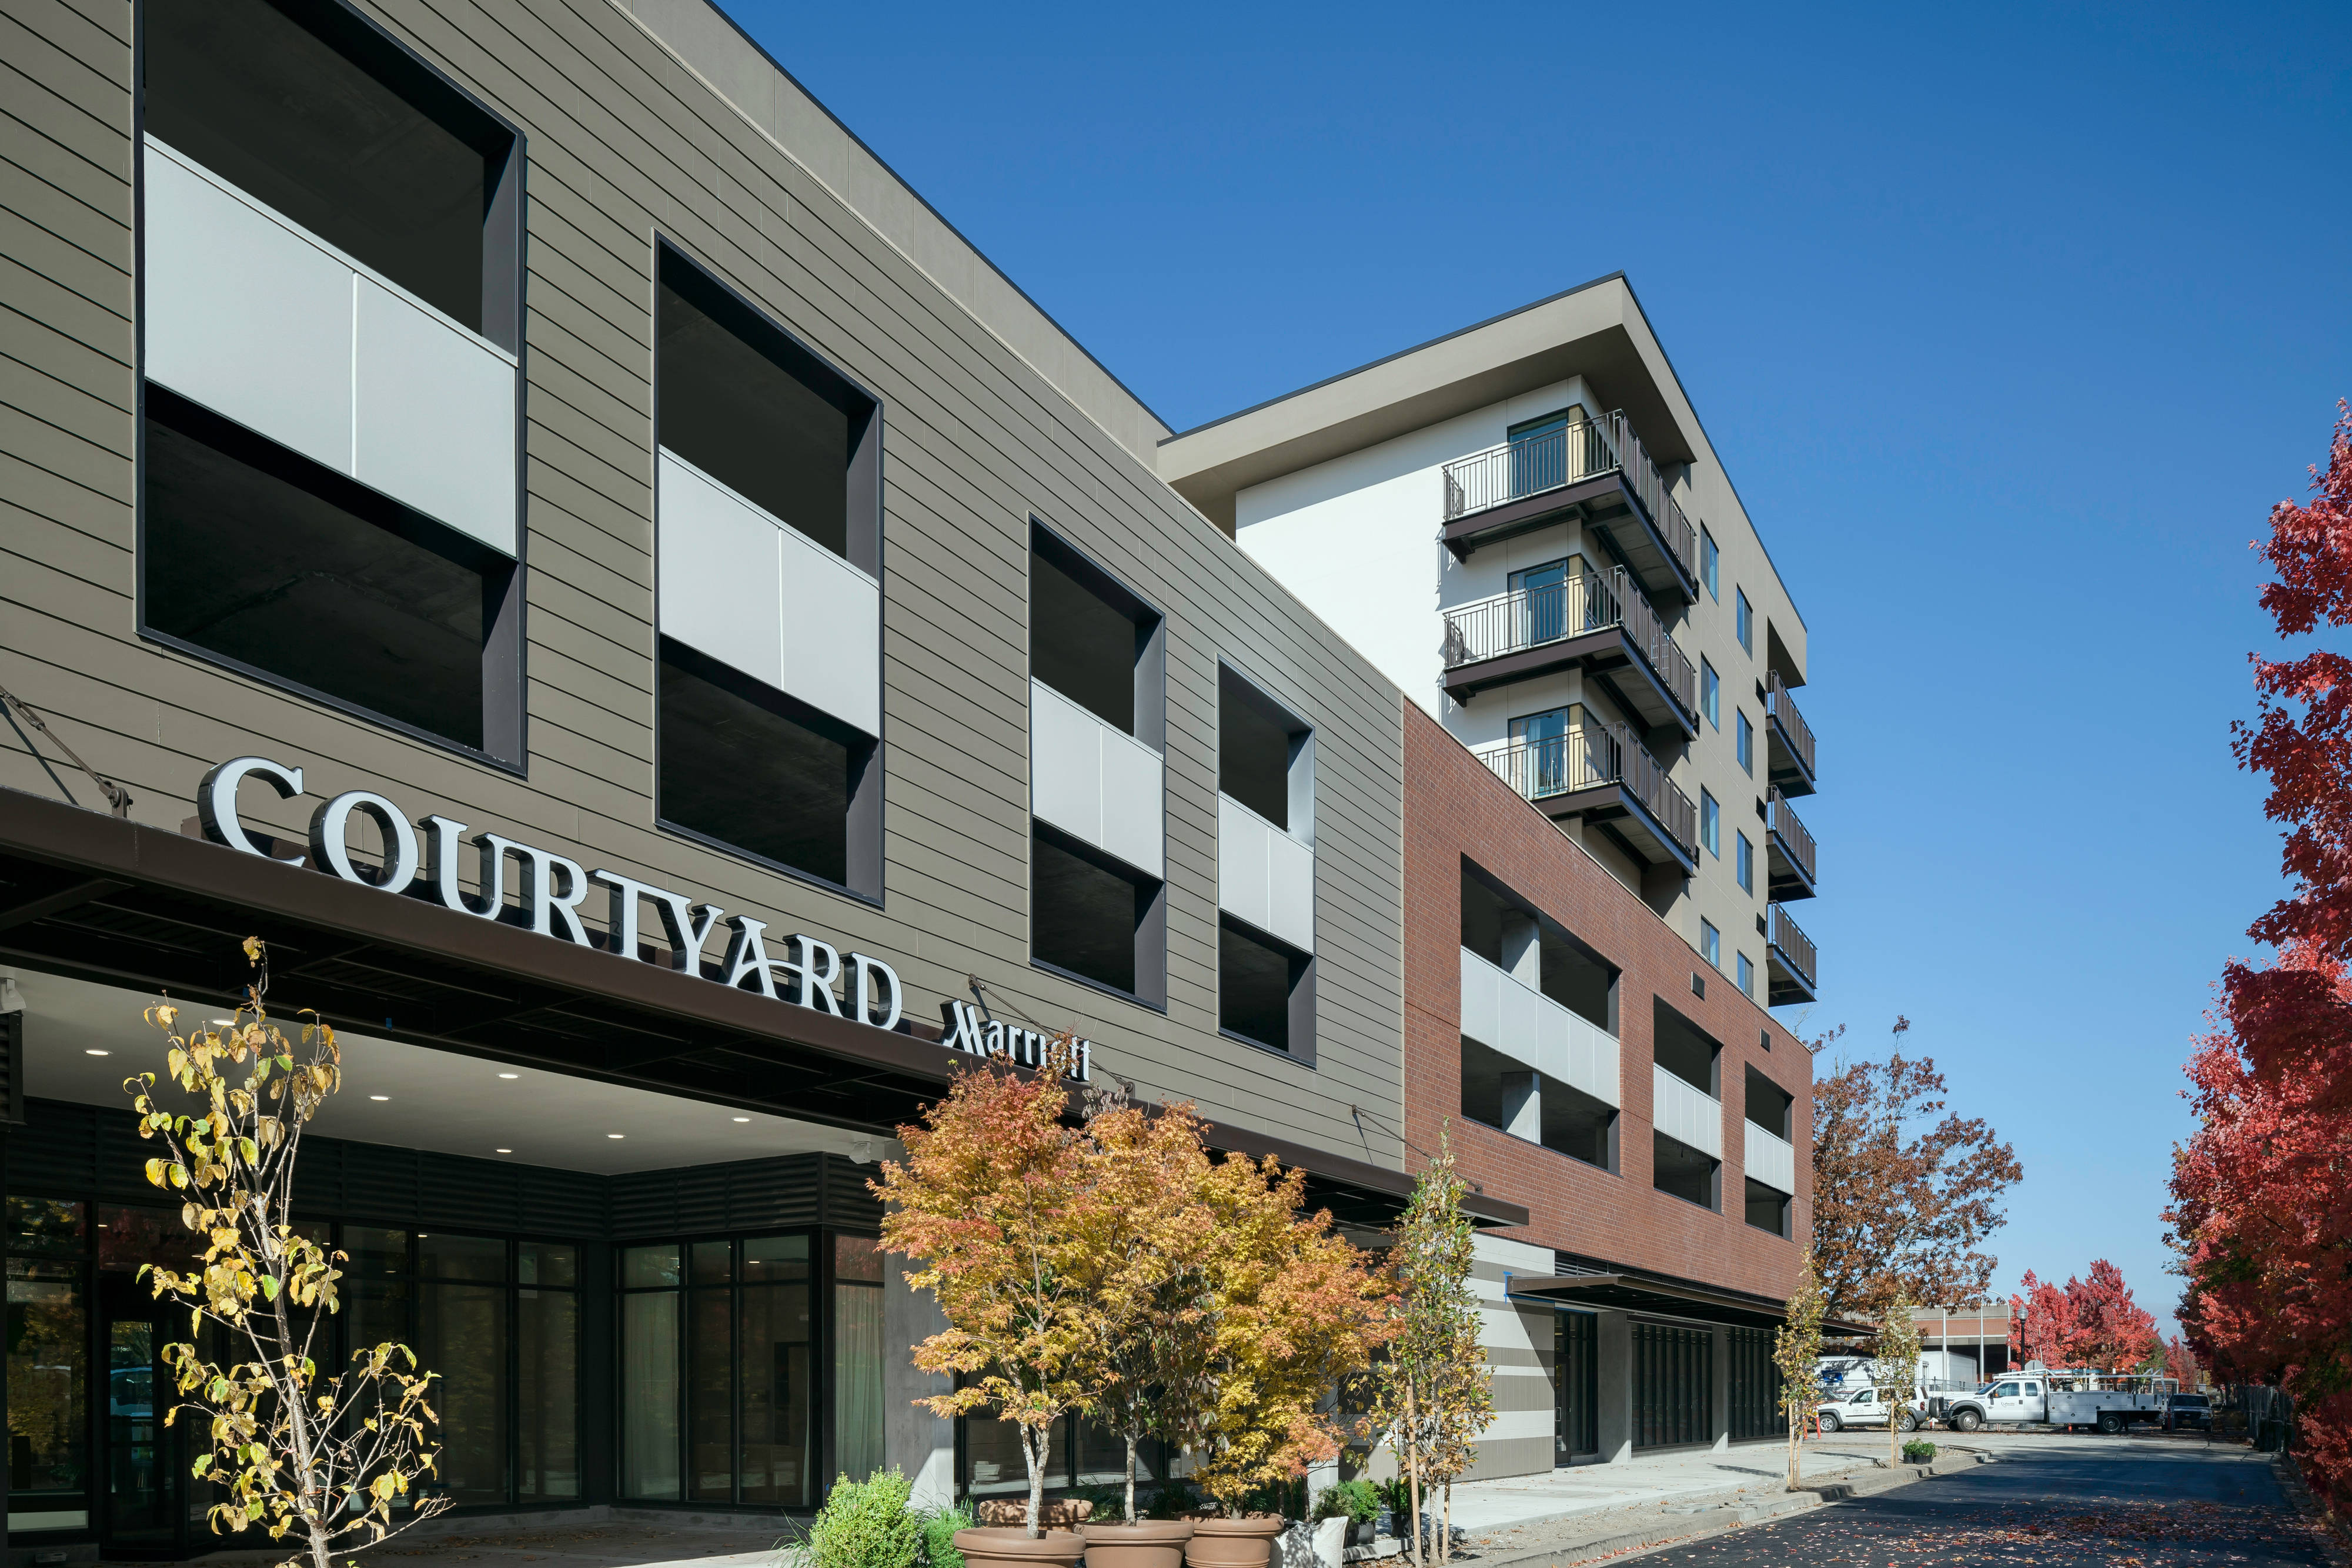 Photo of Courtyard by Marriott Corvallis, Corvallis, OR